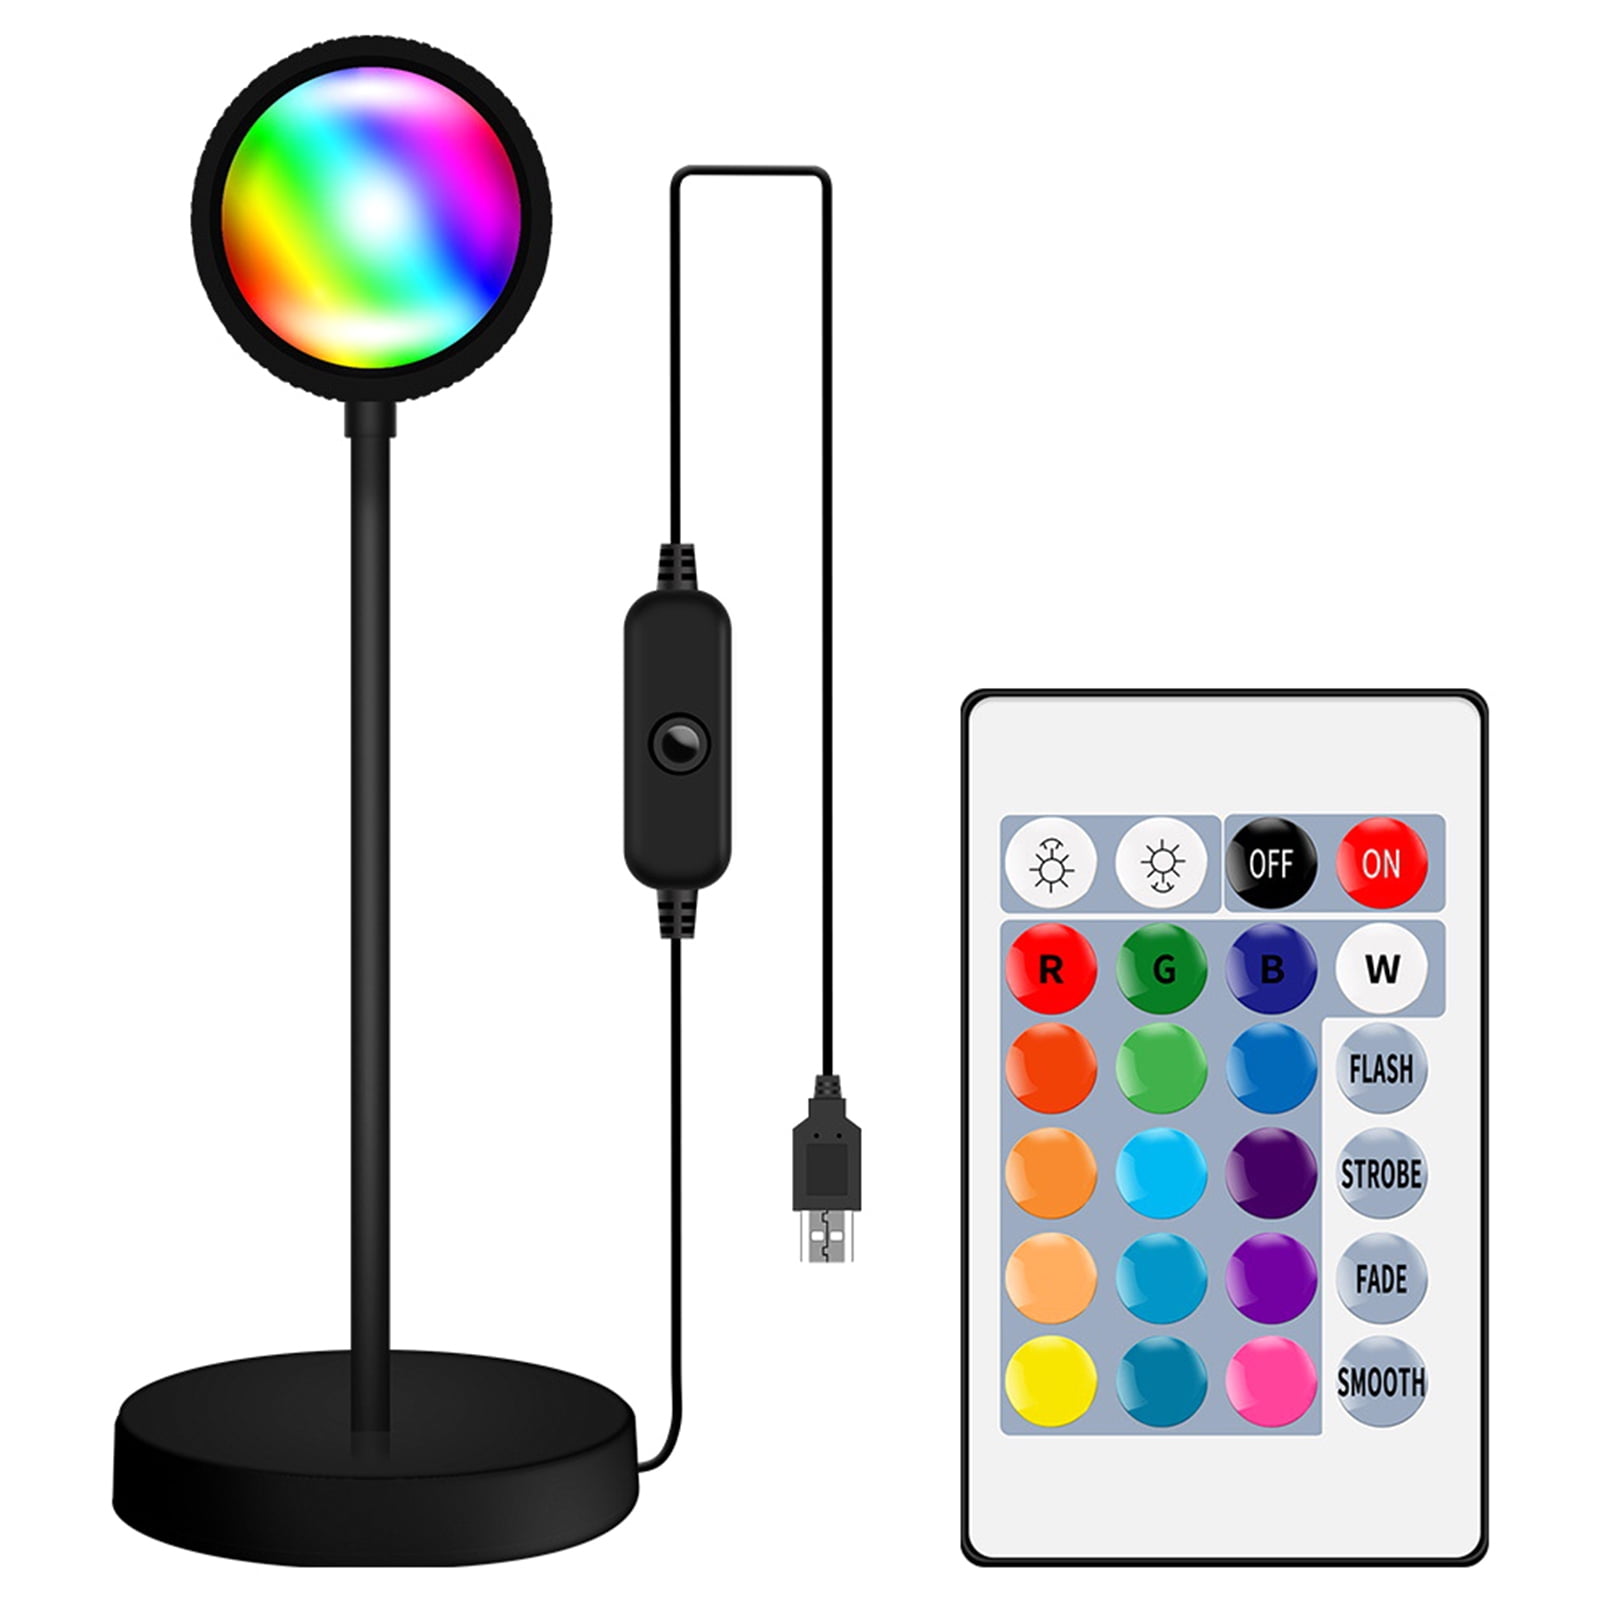 TLZGCNMD Sunset Projection Lamp, Sunset Lamp with Remote RGB 16 Colors,  360° Rotation Sunset Light Projector, Rainbow Projection Lamp LED Night  Light for Bedroom, Party, Photography 